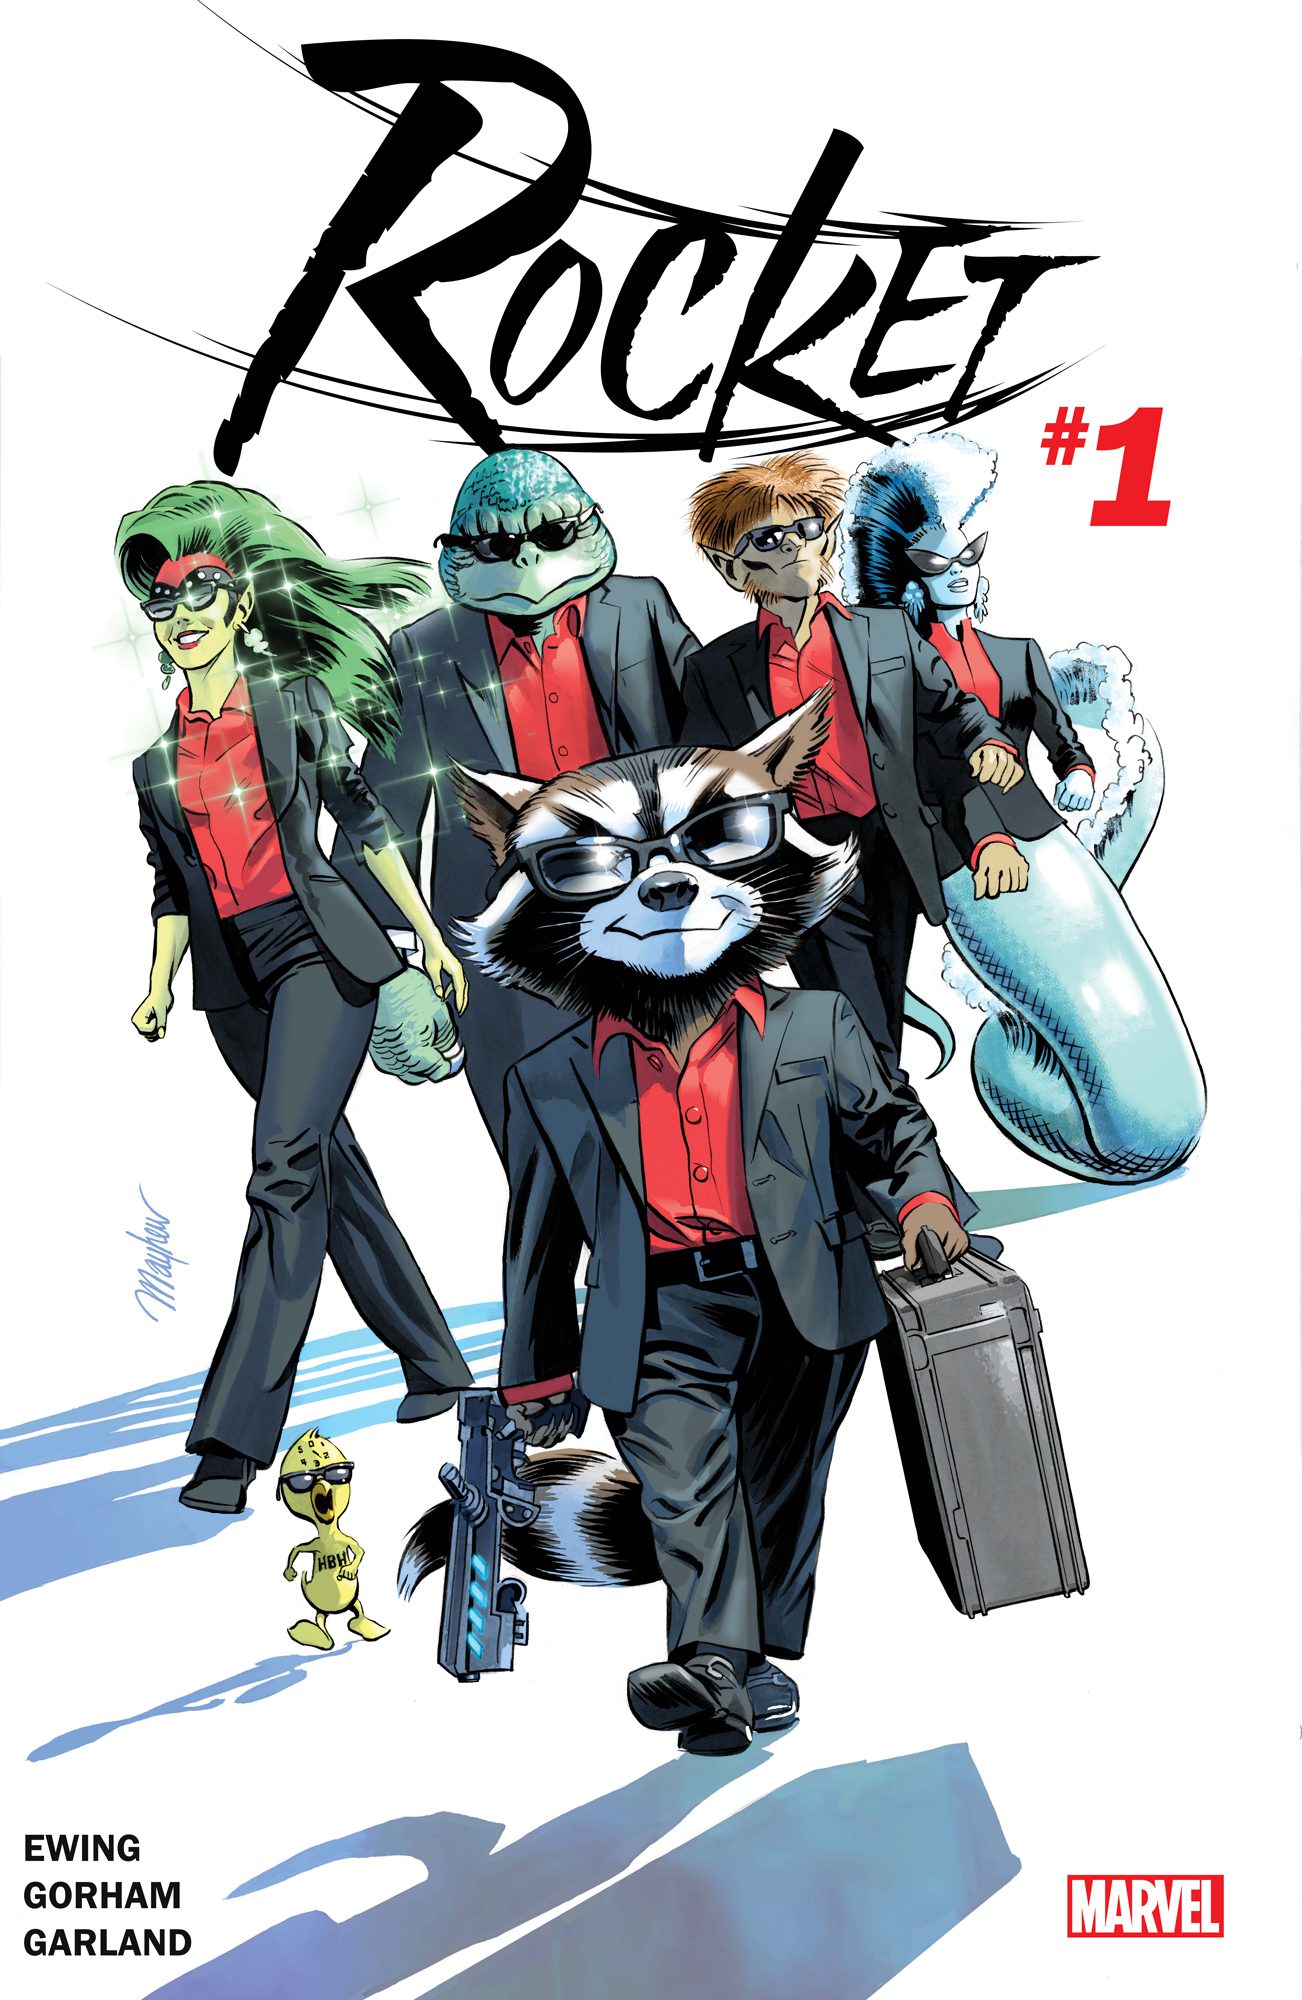 ROCKET #1 Blasts Off For a Life of Crime This May